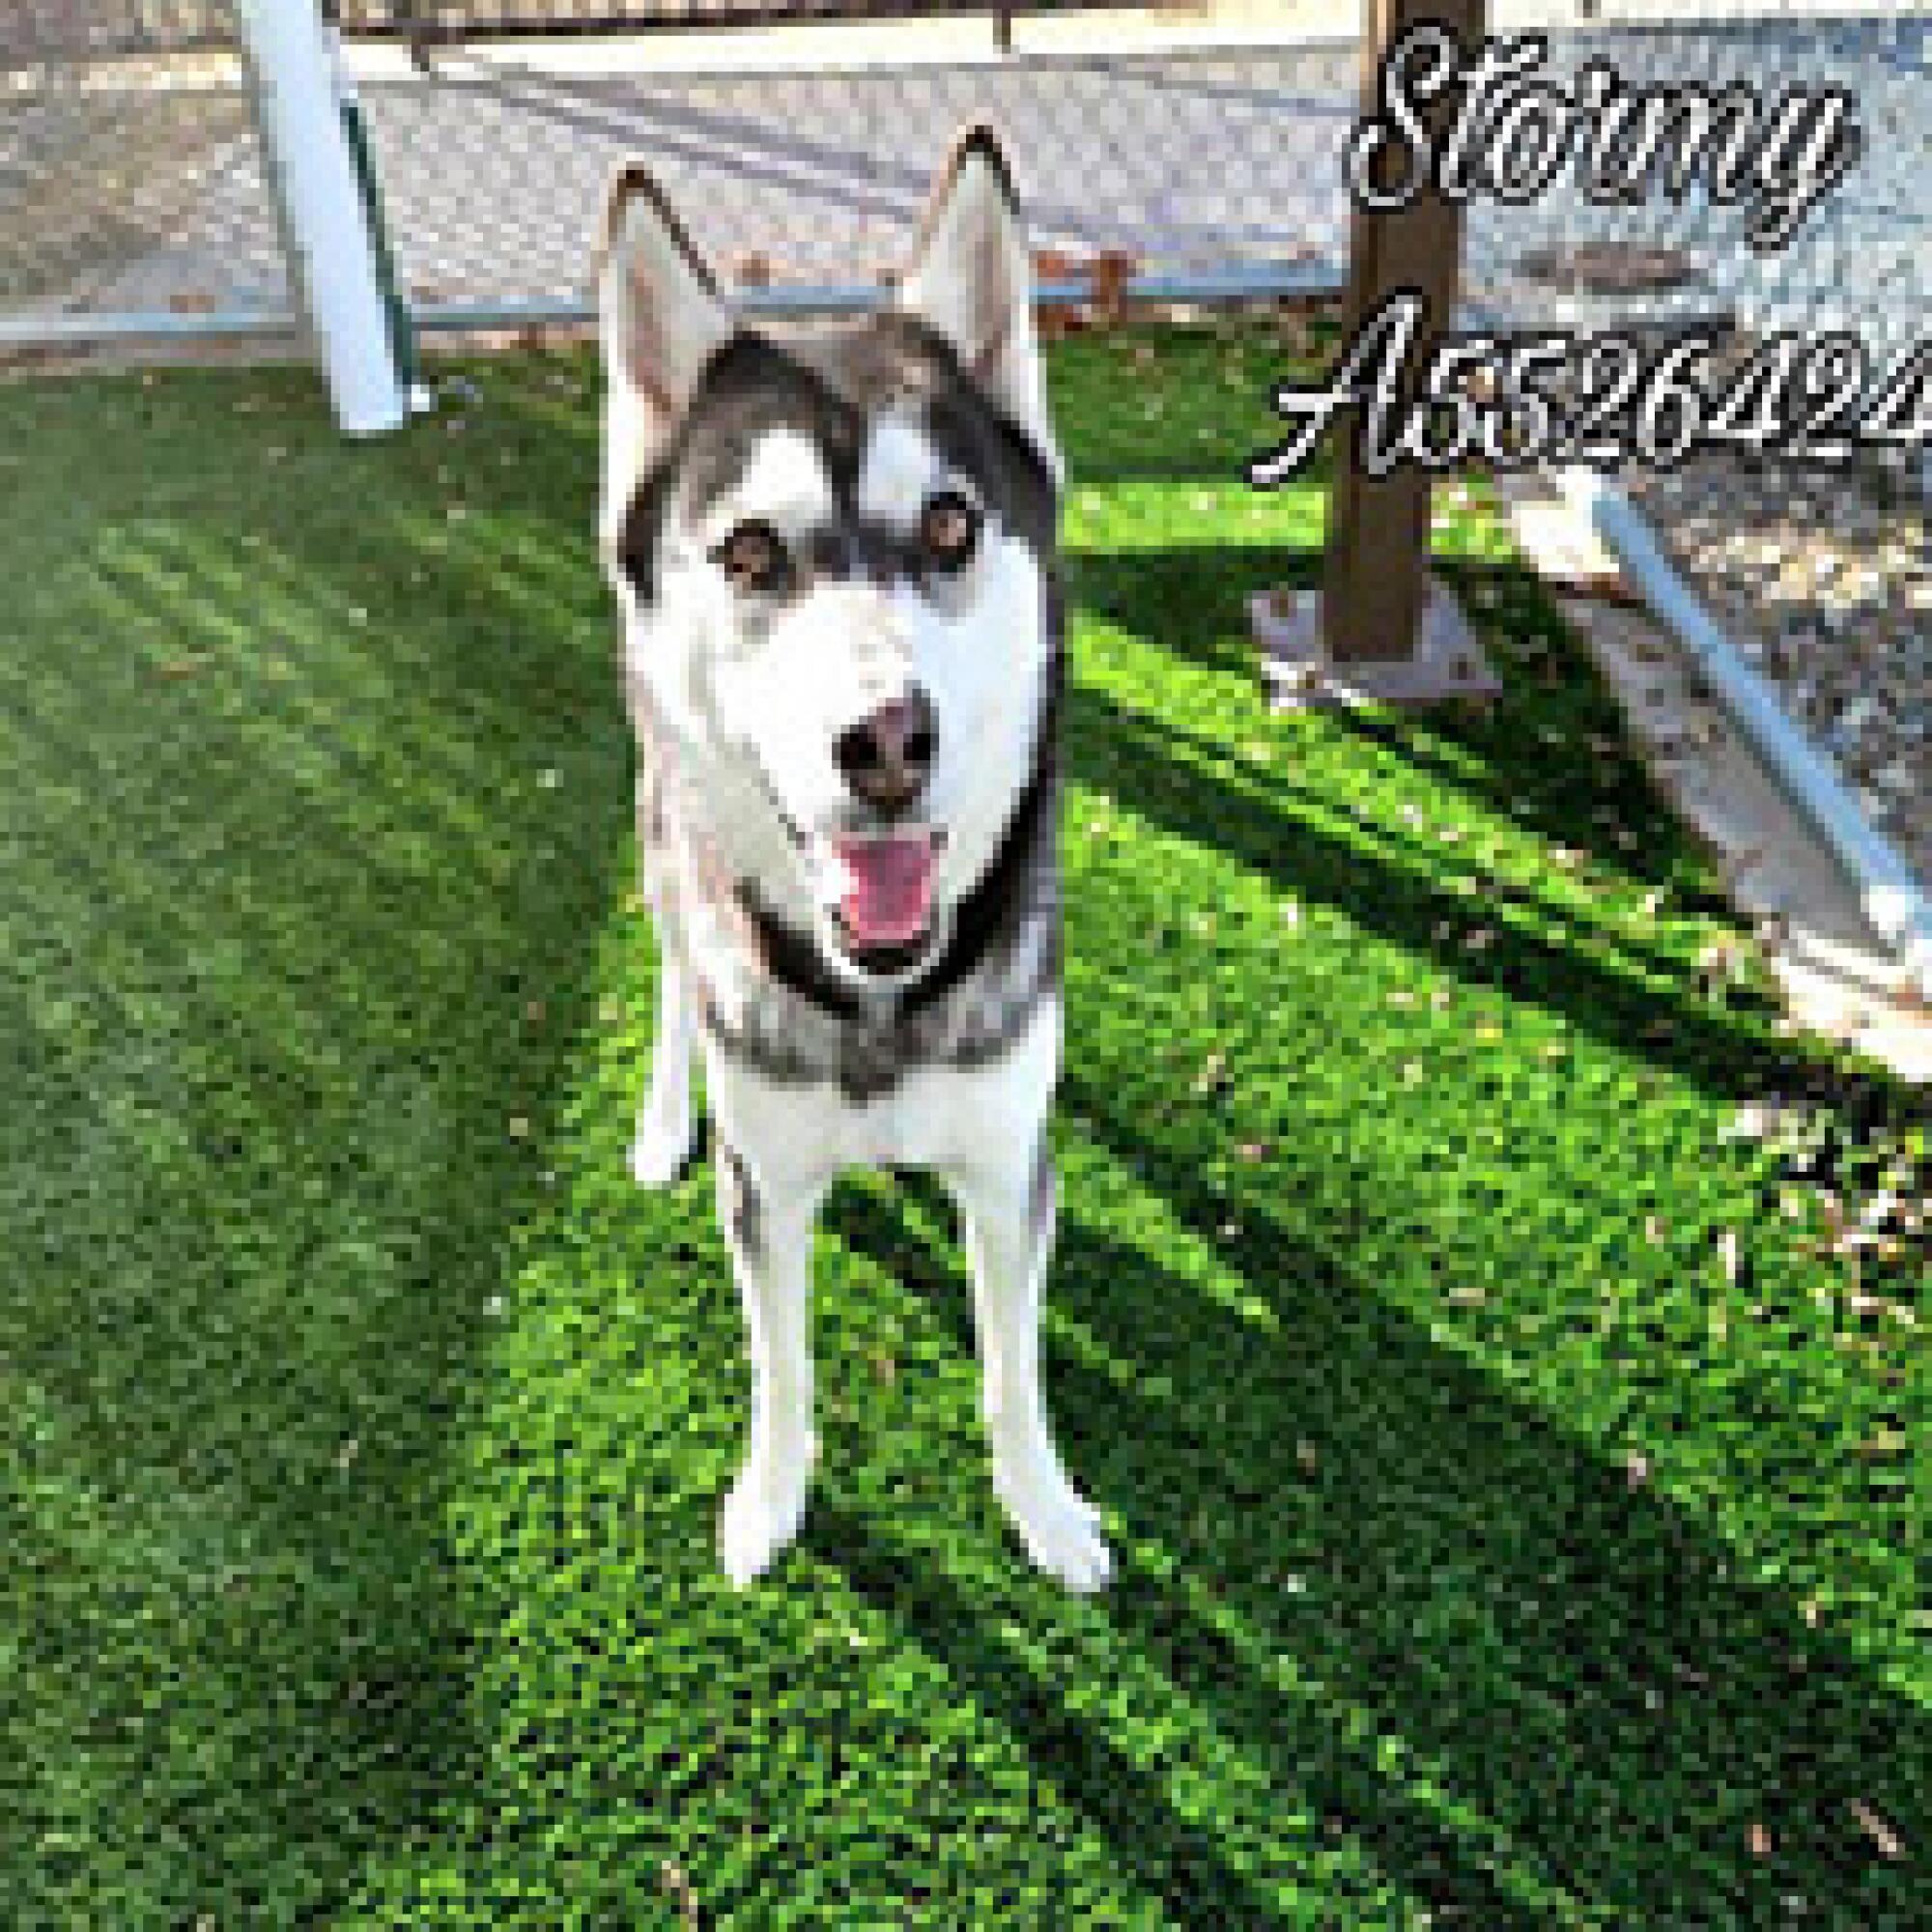 A photo labeled "Stormy" with an alphanumeric code shows a Siberian husky standing on a fenced-in lawn